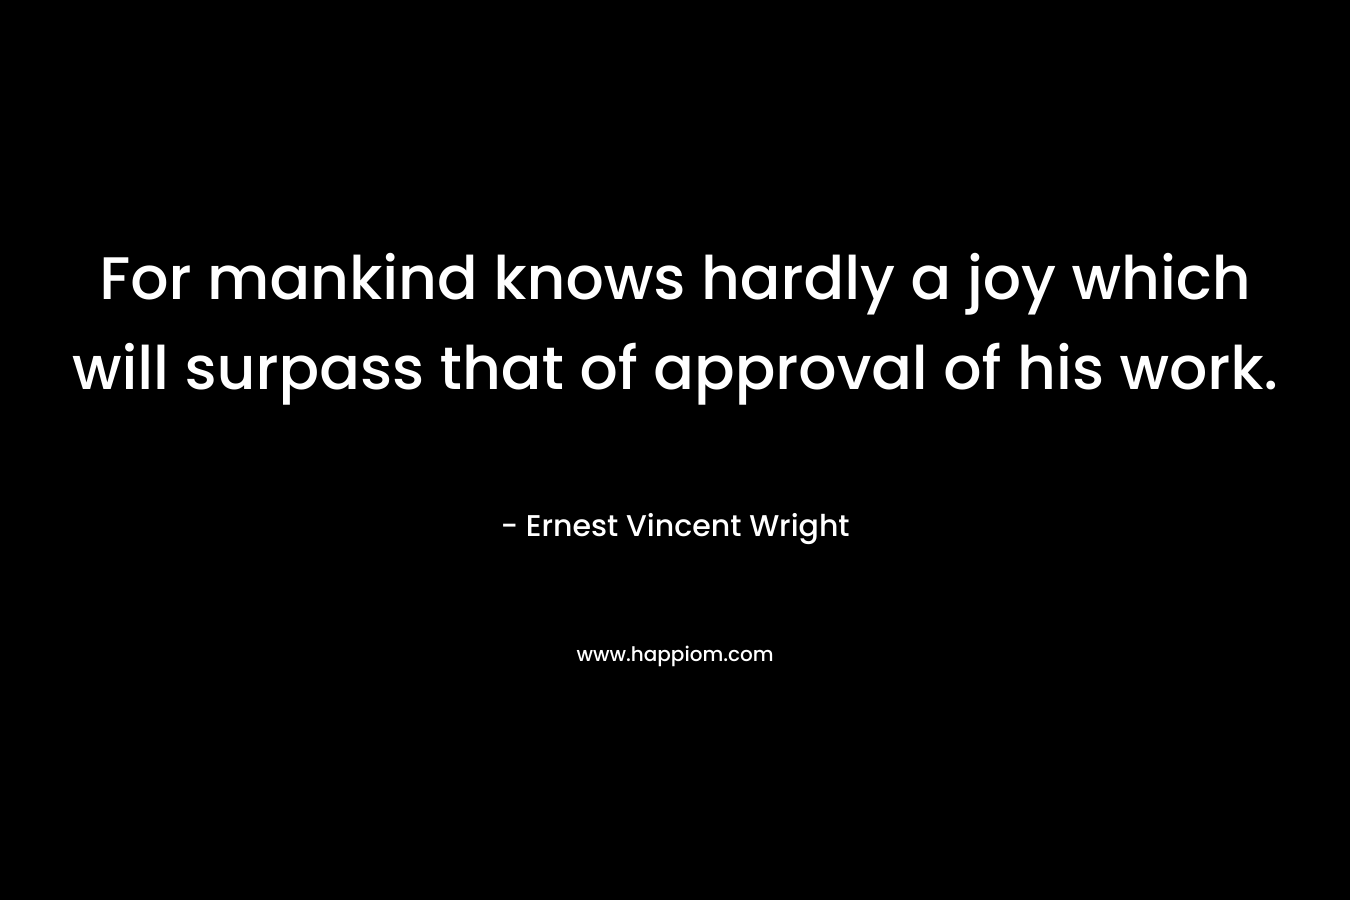 For mankind knows hardly a joy which will surpass that of approval of his work. – Ernest Vincent Wright